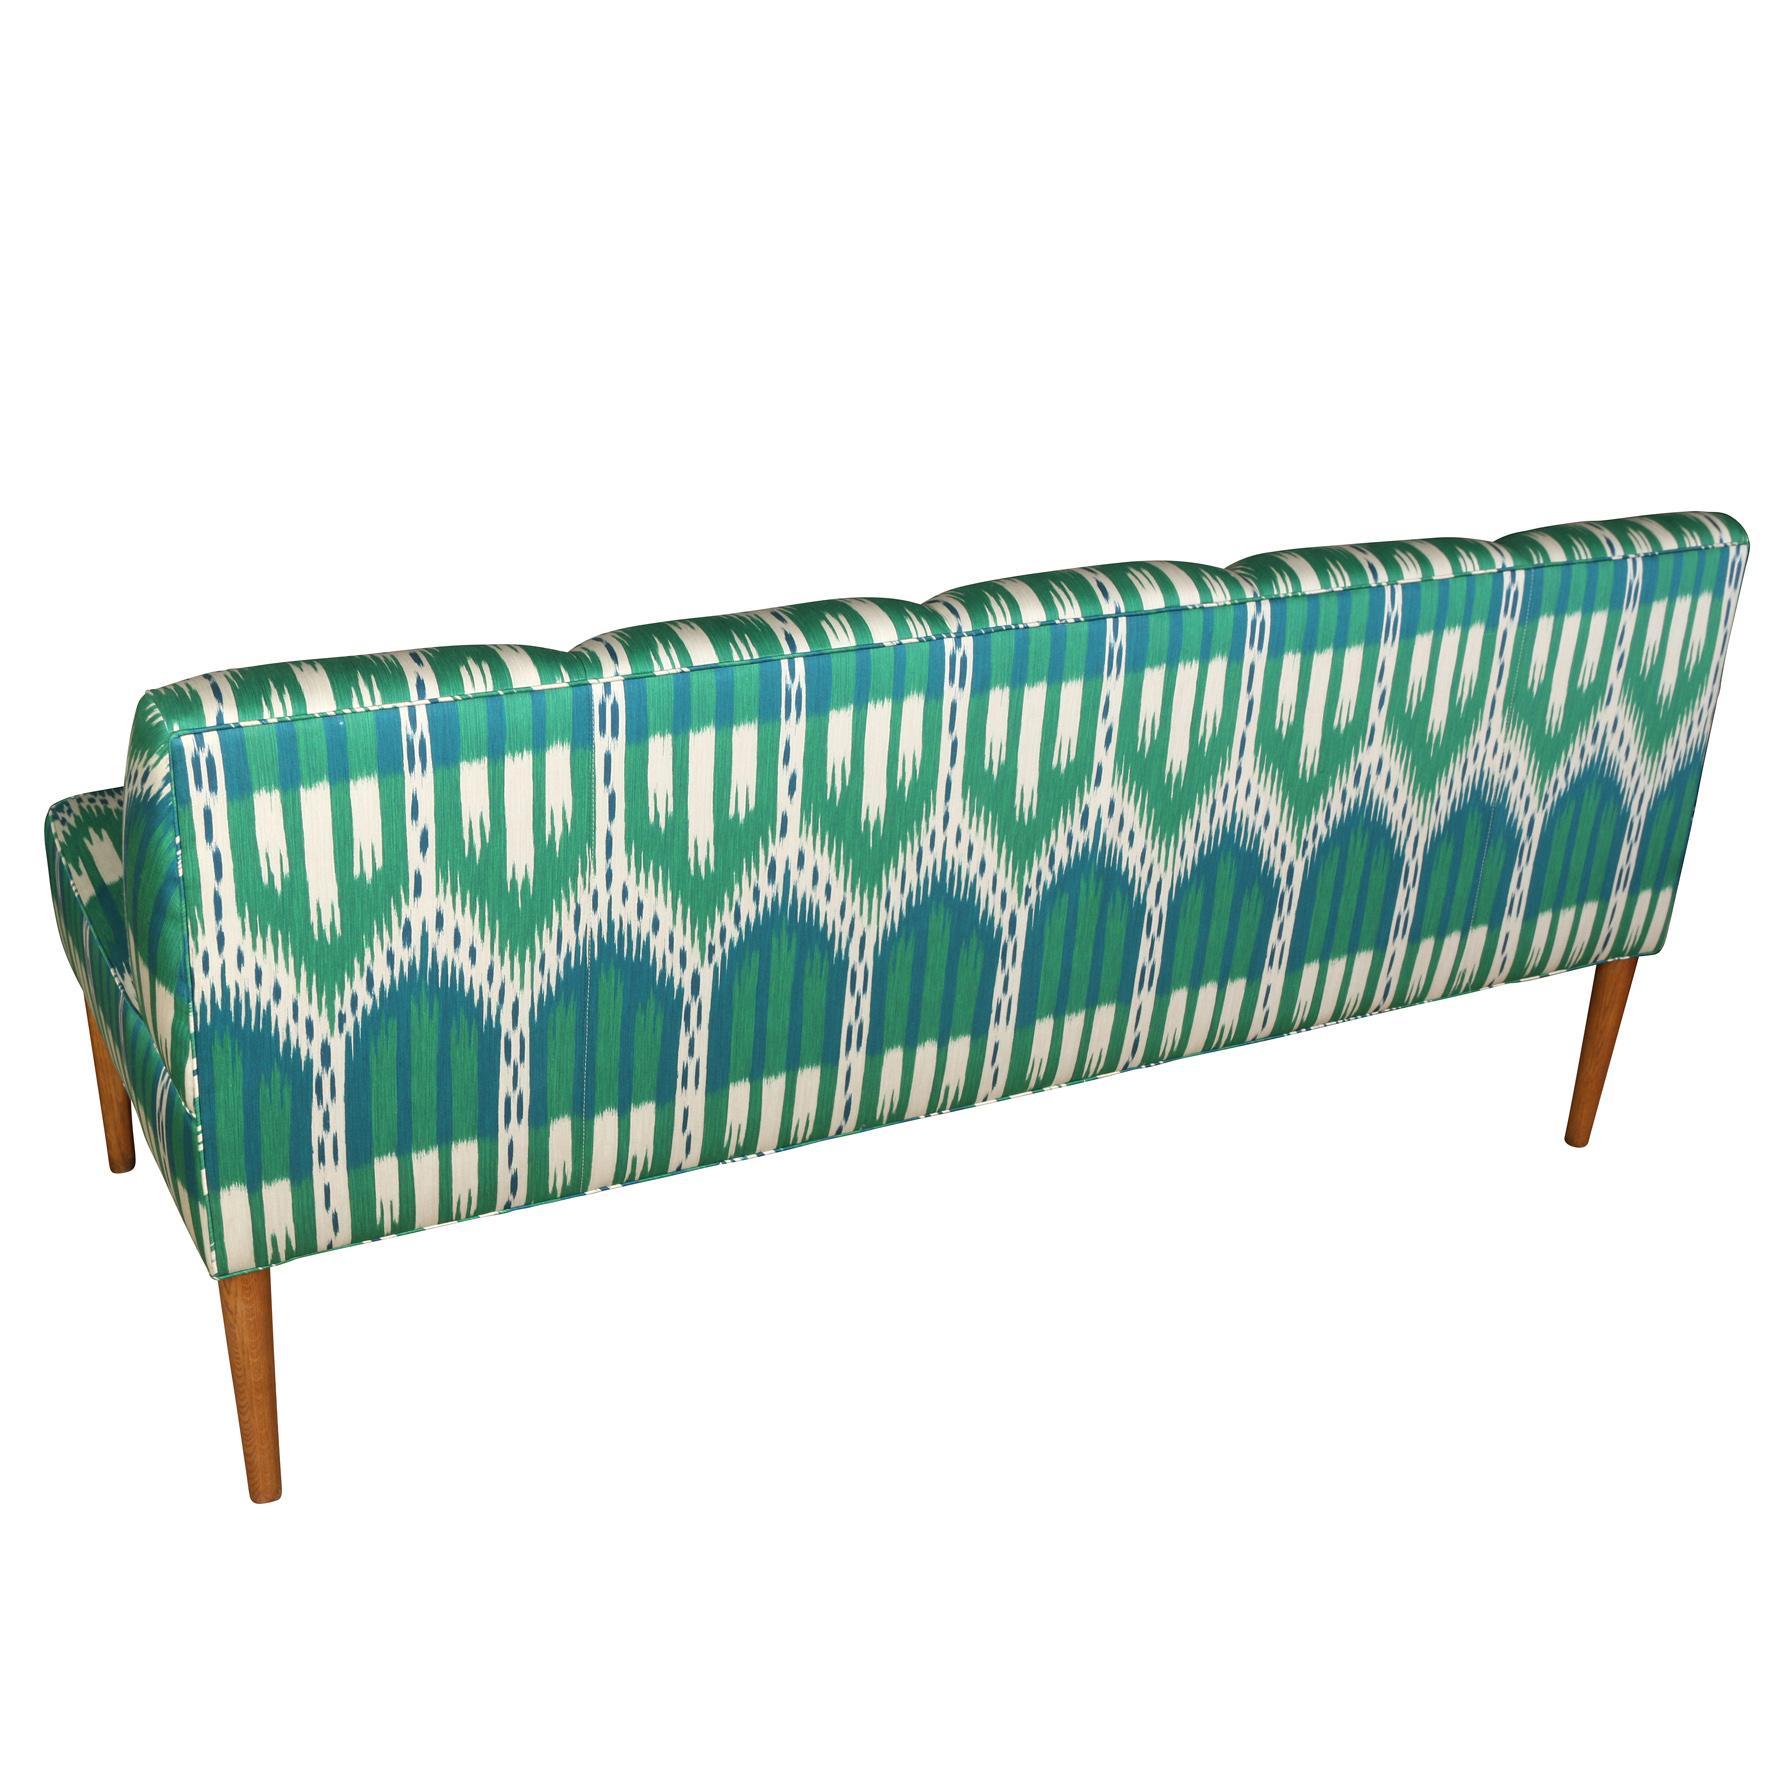 Teal and Turquoise Ikat Banquette In Excellent Condition For Sale In Locust Valley, NY